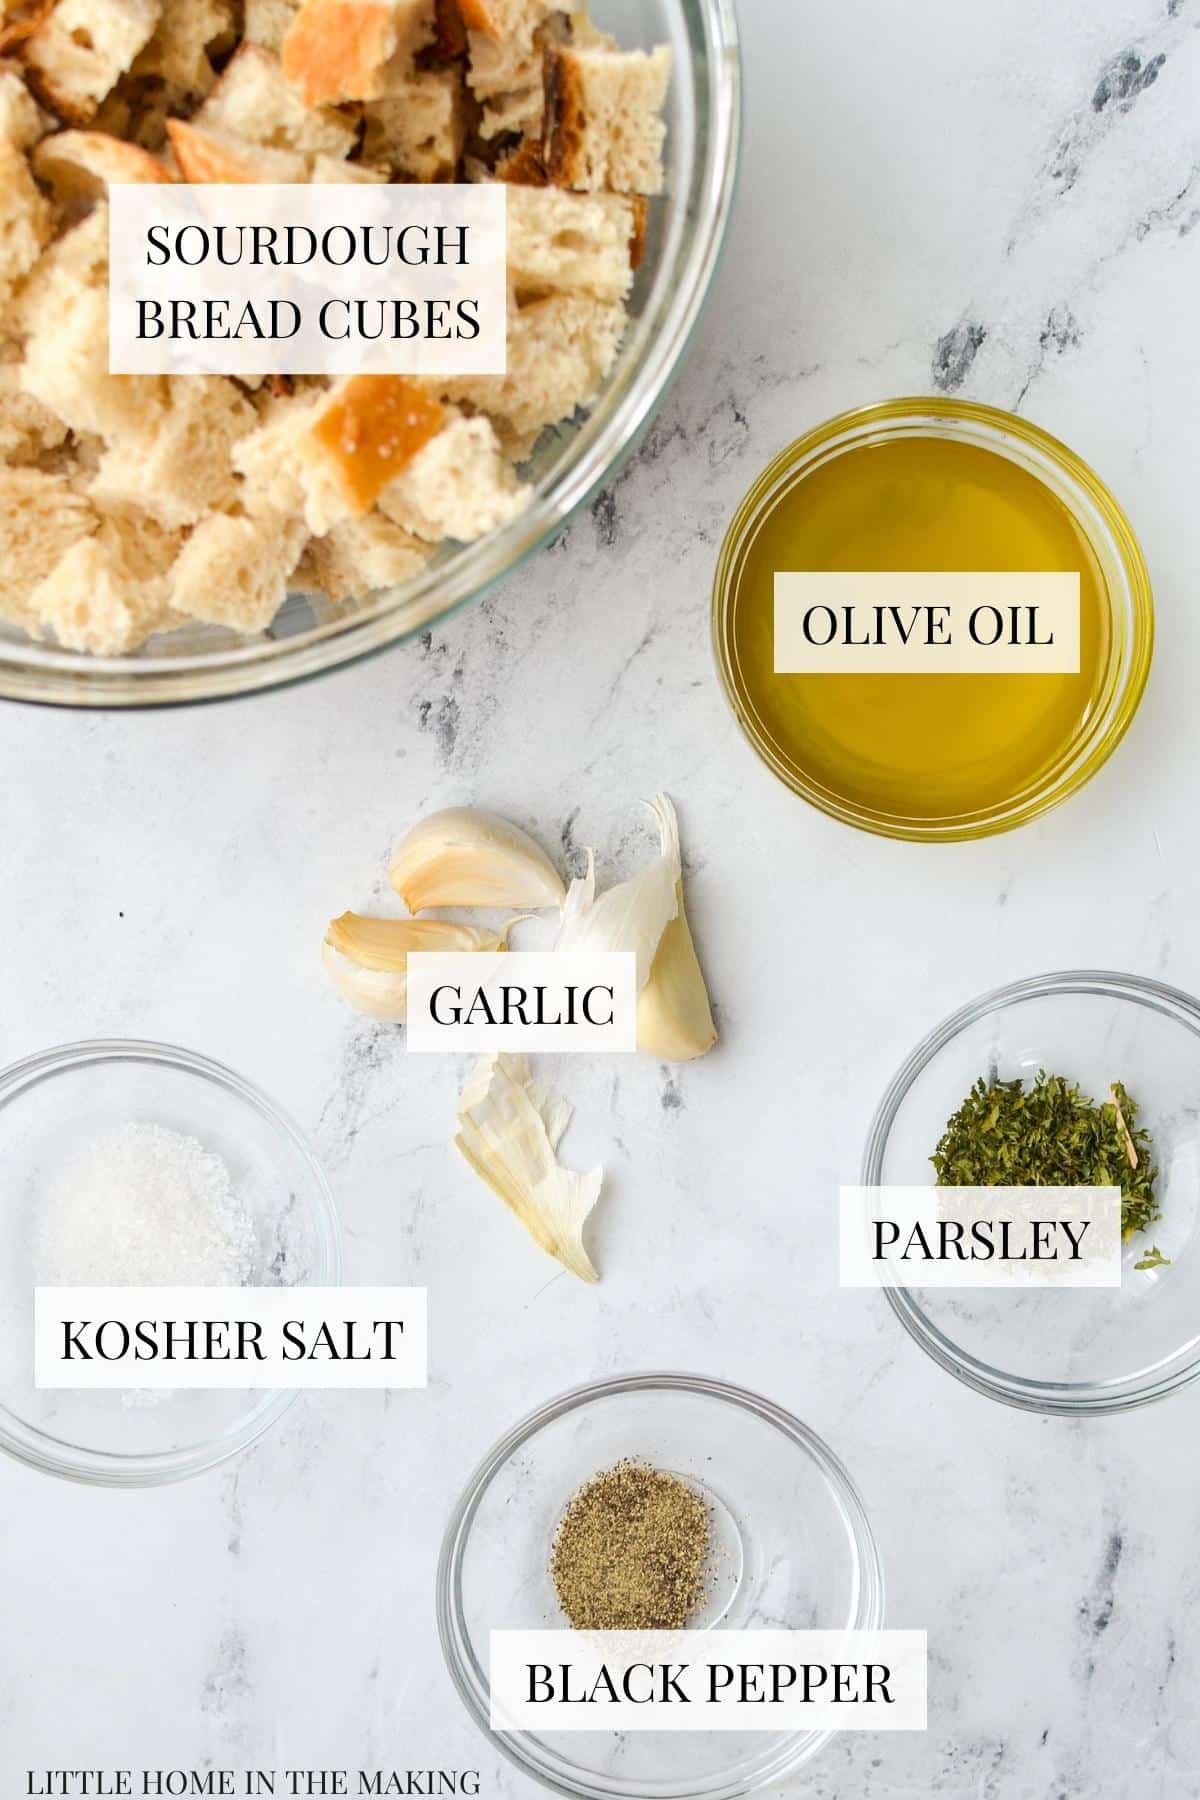 The ingredients needed to make sourdough croutons, including: sourdough bread cubes, olive oil, salt, pepper, parsley and garlic,